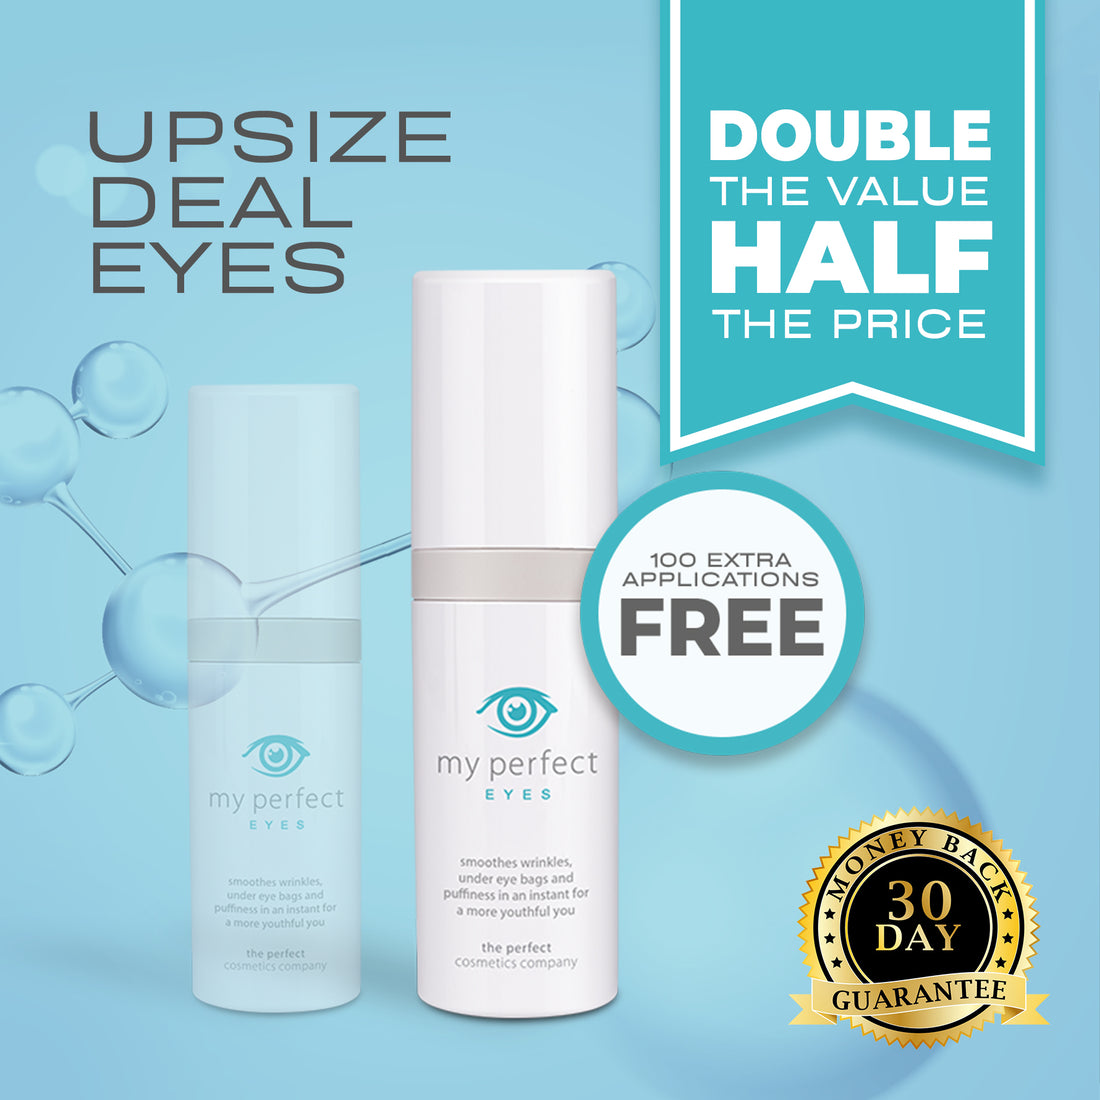 Upsize TV Offer - Buy My Perfect Eyes 10ml £29.99 - Get 20ml (Usually £59.99)